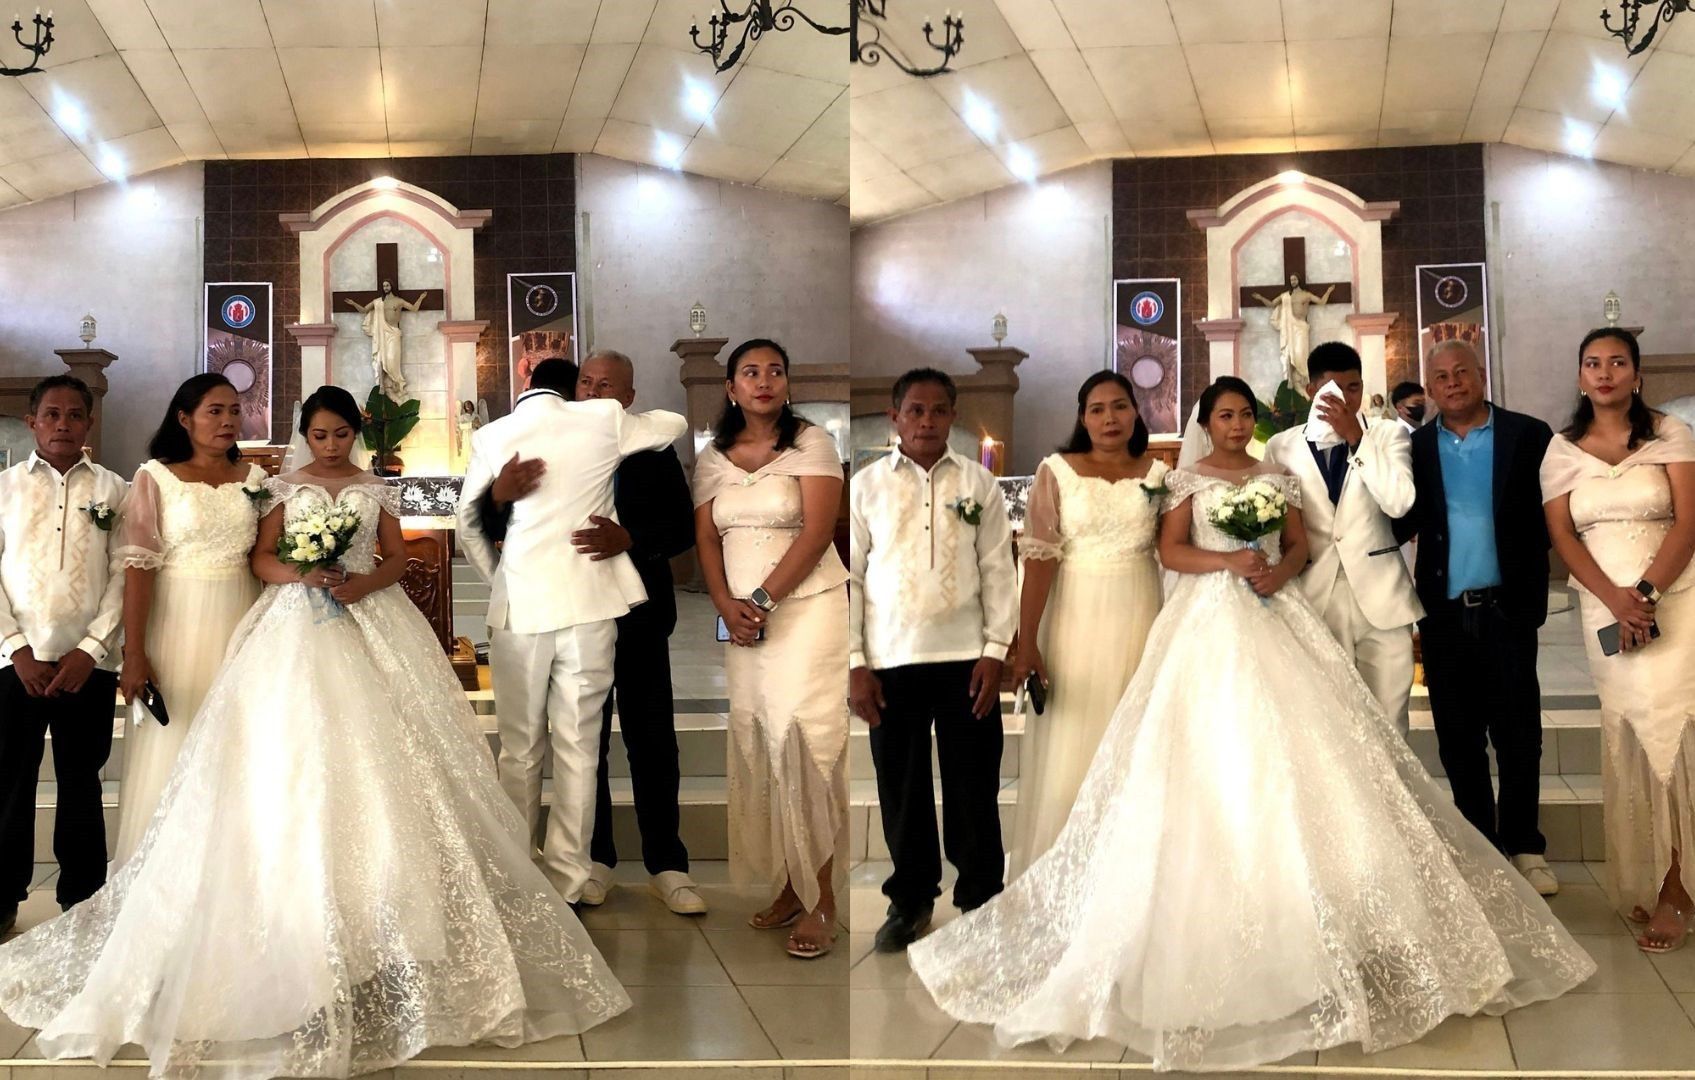 Viral Negros newlyweds to remarry after church incident